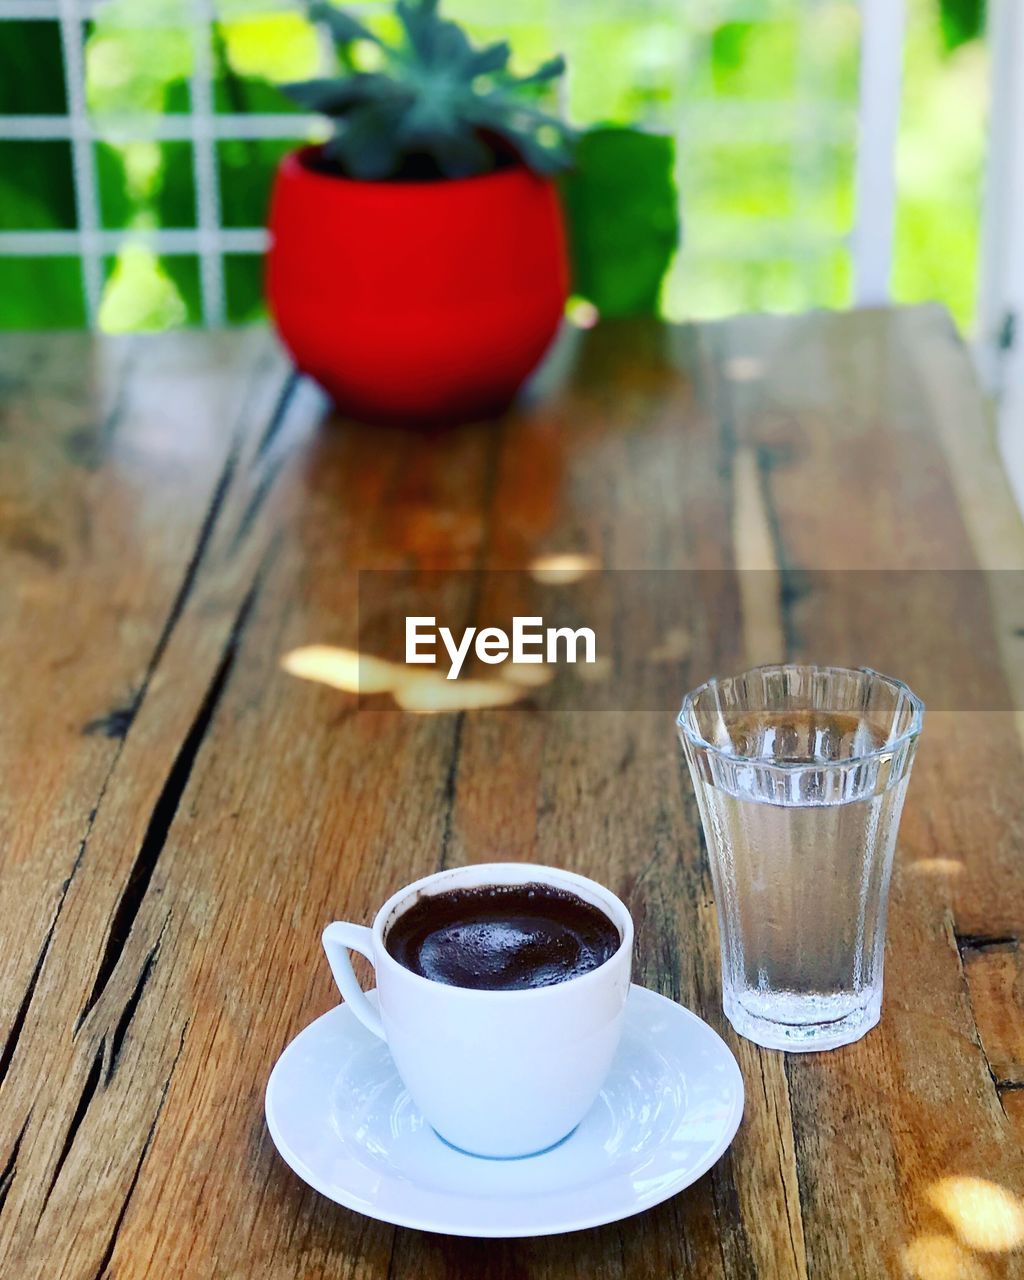 COFFEE CUP ON TABLE WITH GLASS